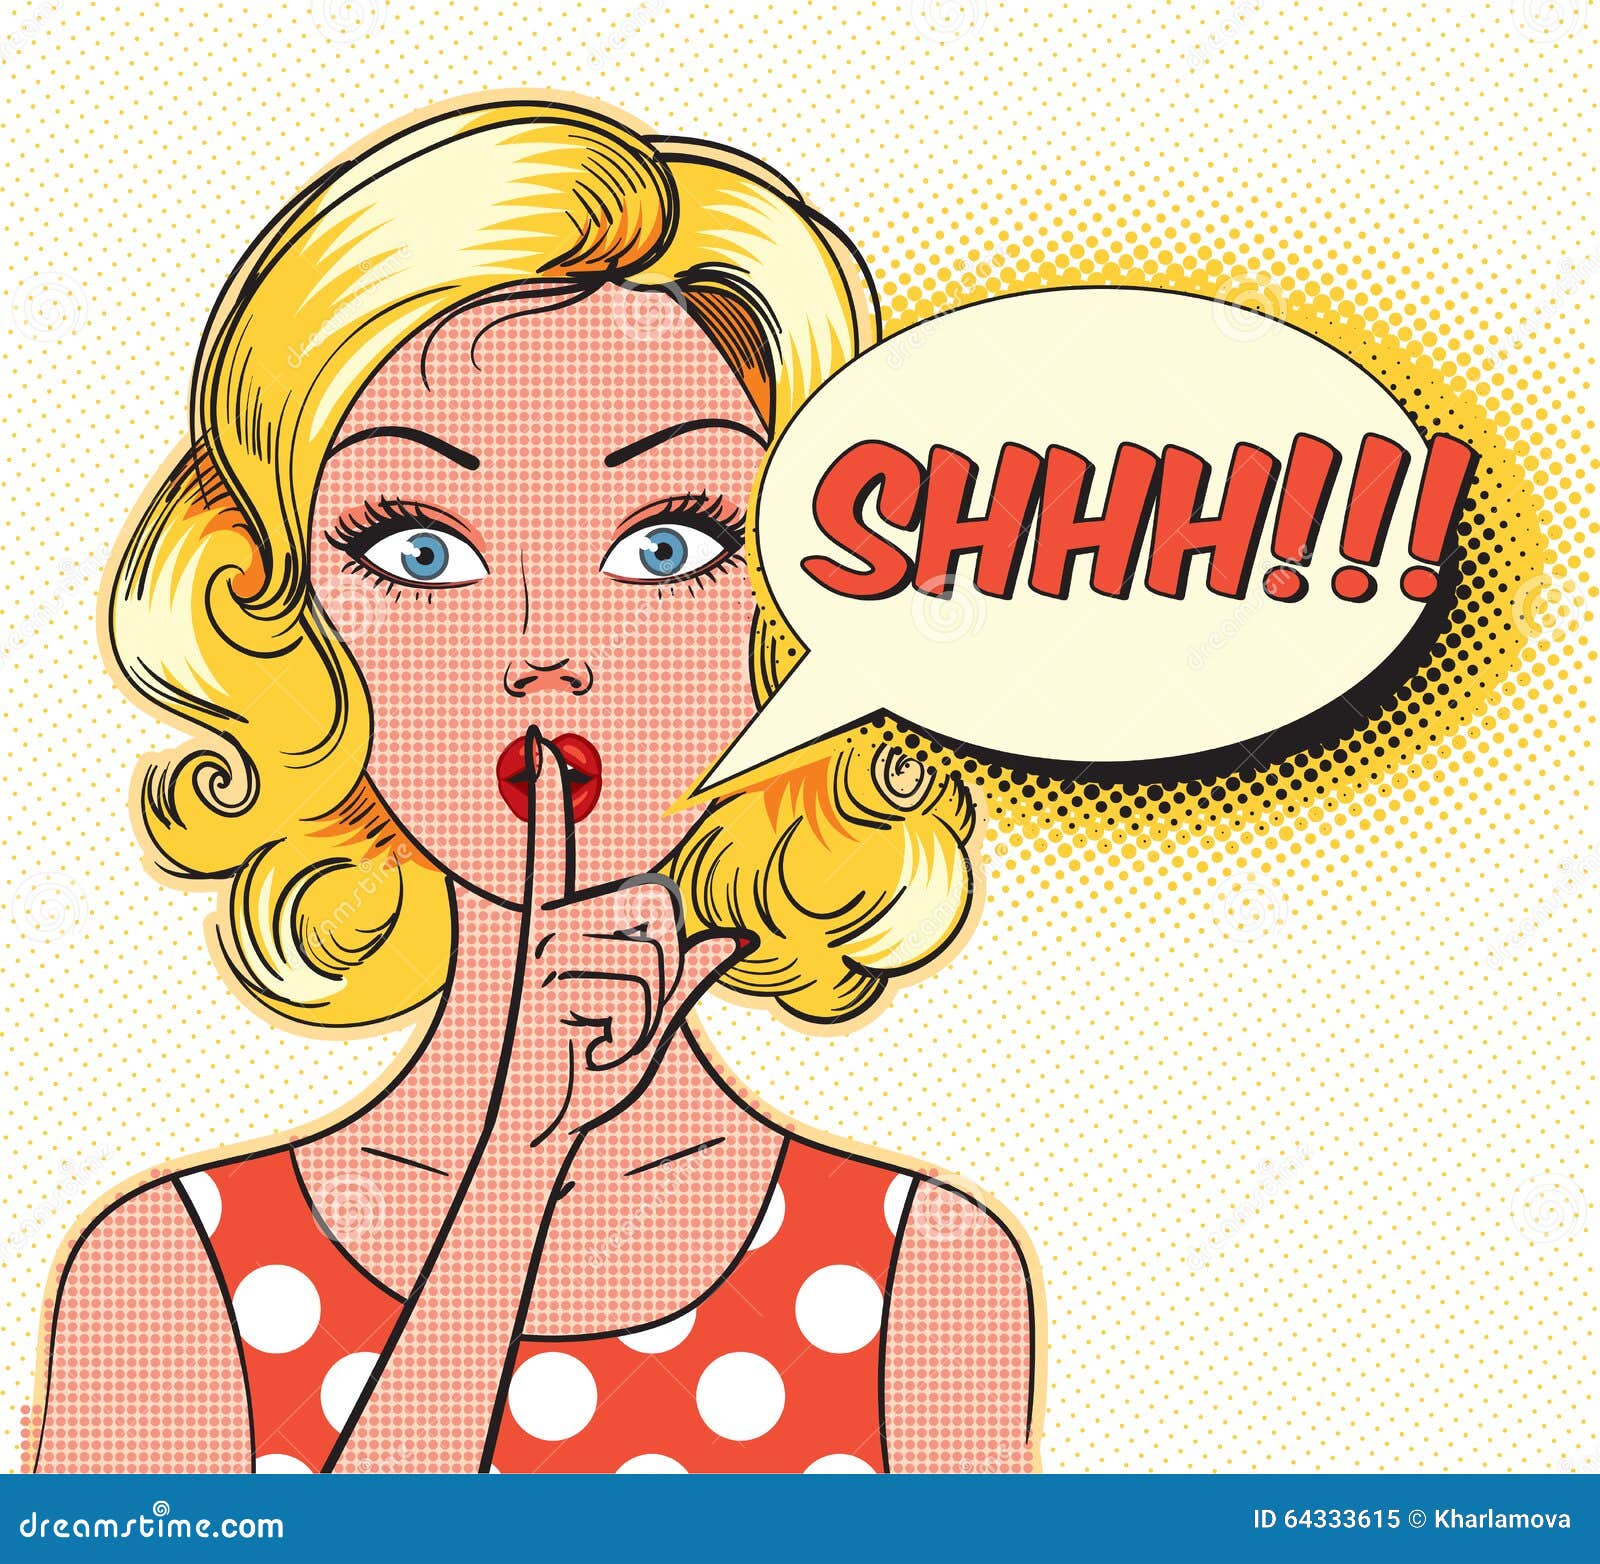 Shhh Cartoons, Illustrations & Vector Stock Images - 403 Pictures to